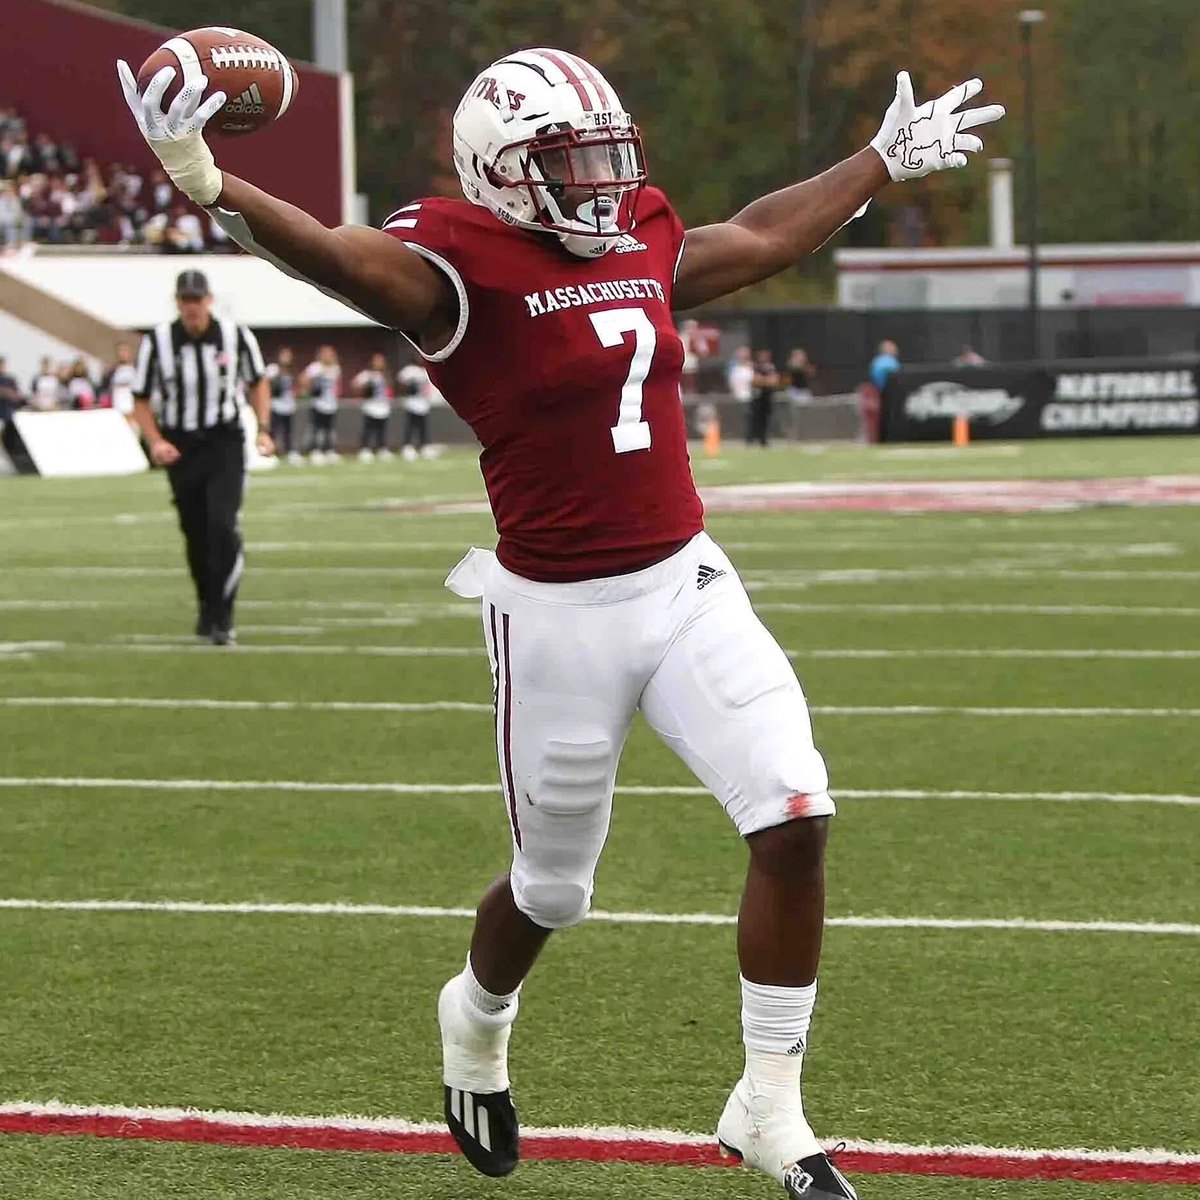 BLESSINGS! After a great conversation with @Coach_Mince54 I am blessed to receive a D1 offer from @UMassFootball @FBCoachDBrown @BJacobsonFBall @EPHSRecruiting @cjhirsch4 @small_terrell @On3Recruits @RustyMansell_ @JeremyO_Johnson @lukewinstel